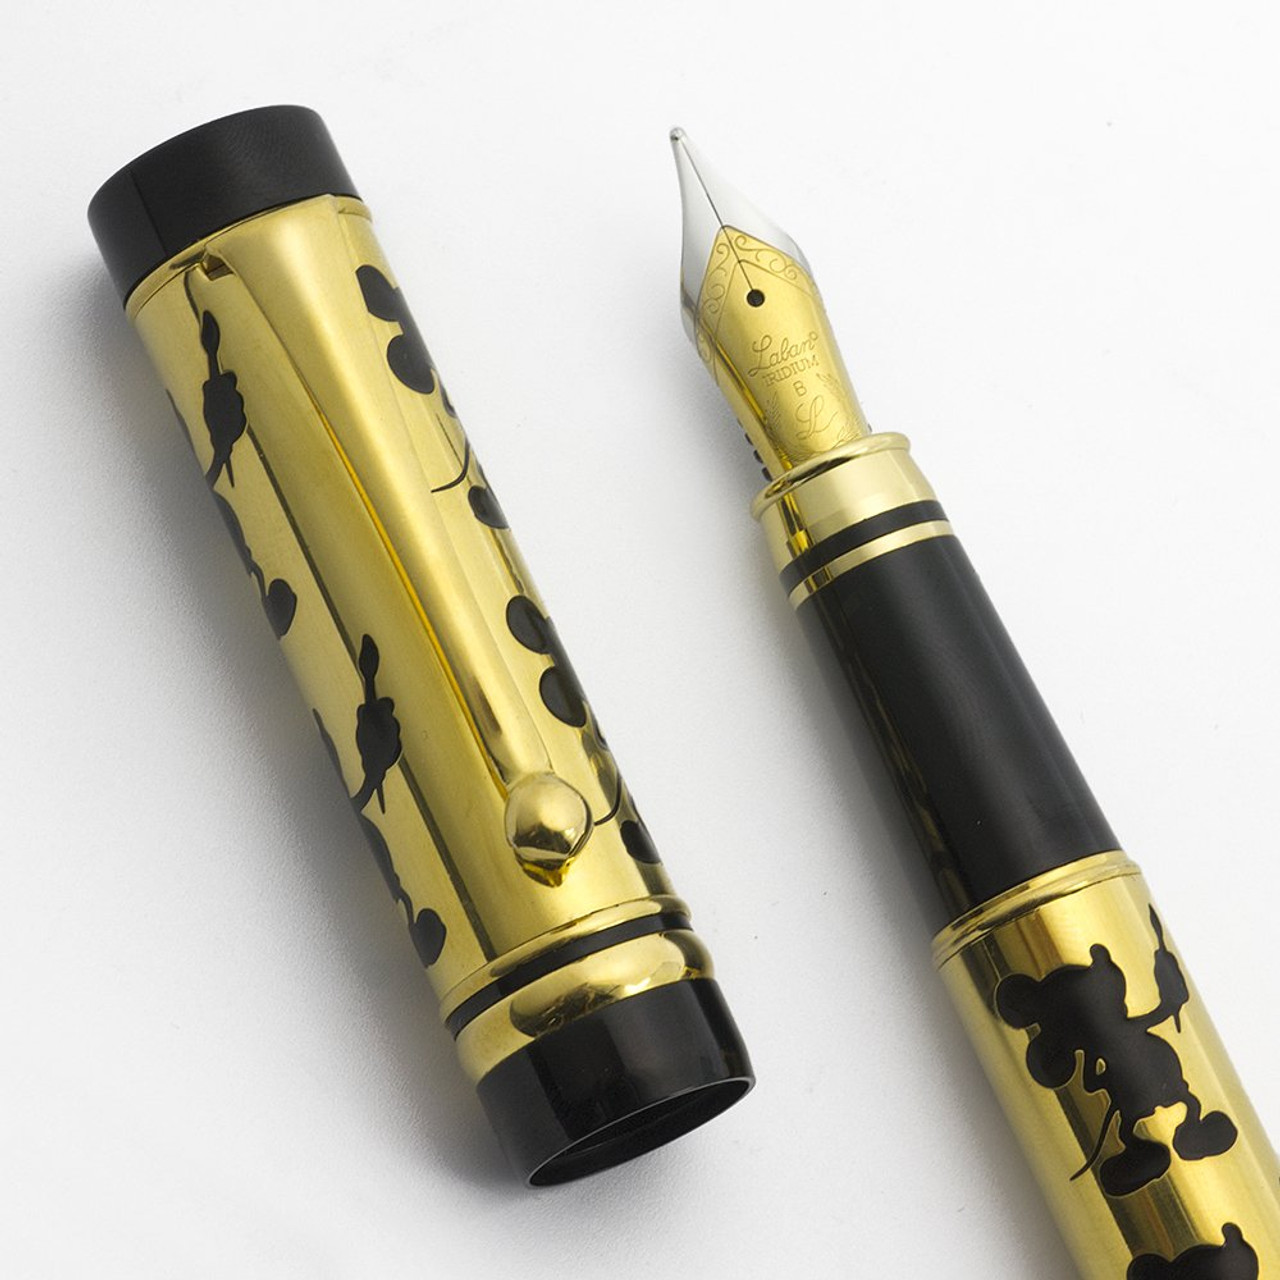 Laban Brass Fountain Pen in IP Brown with Grid